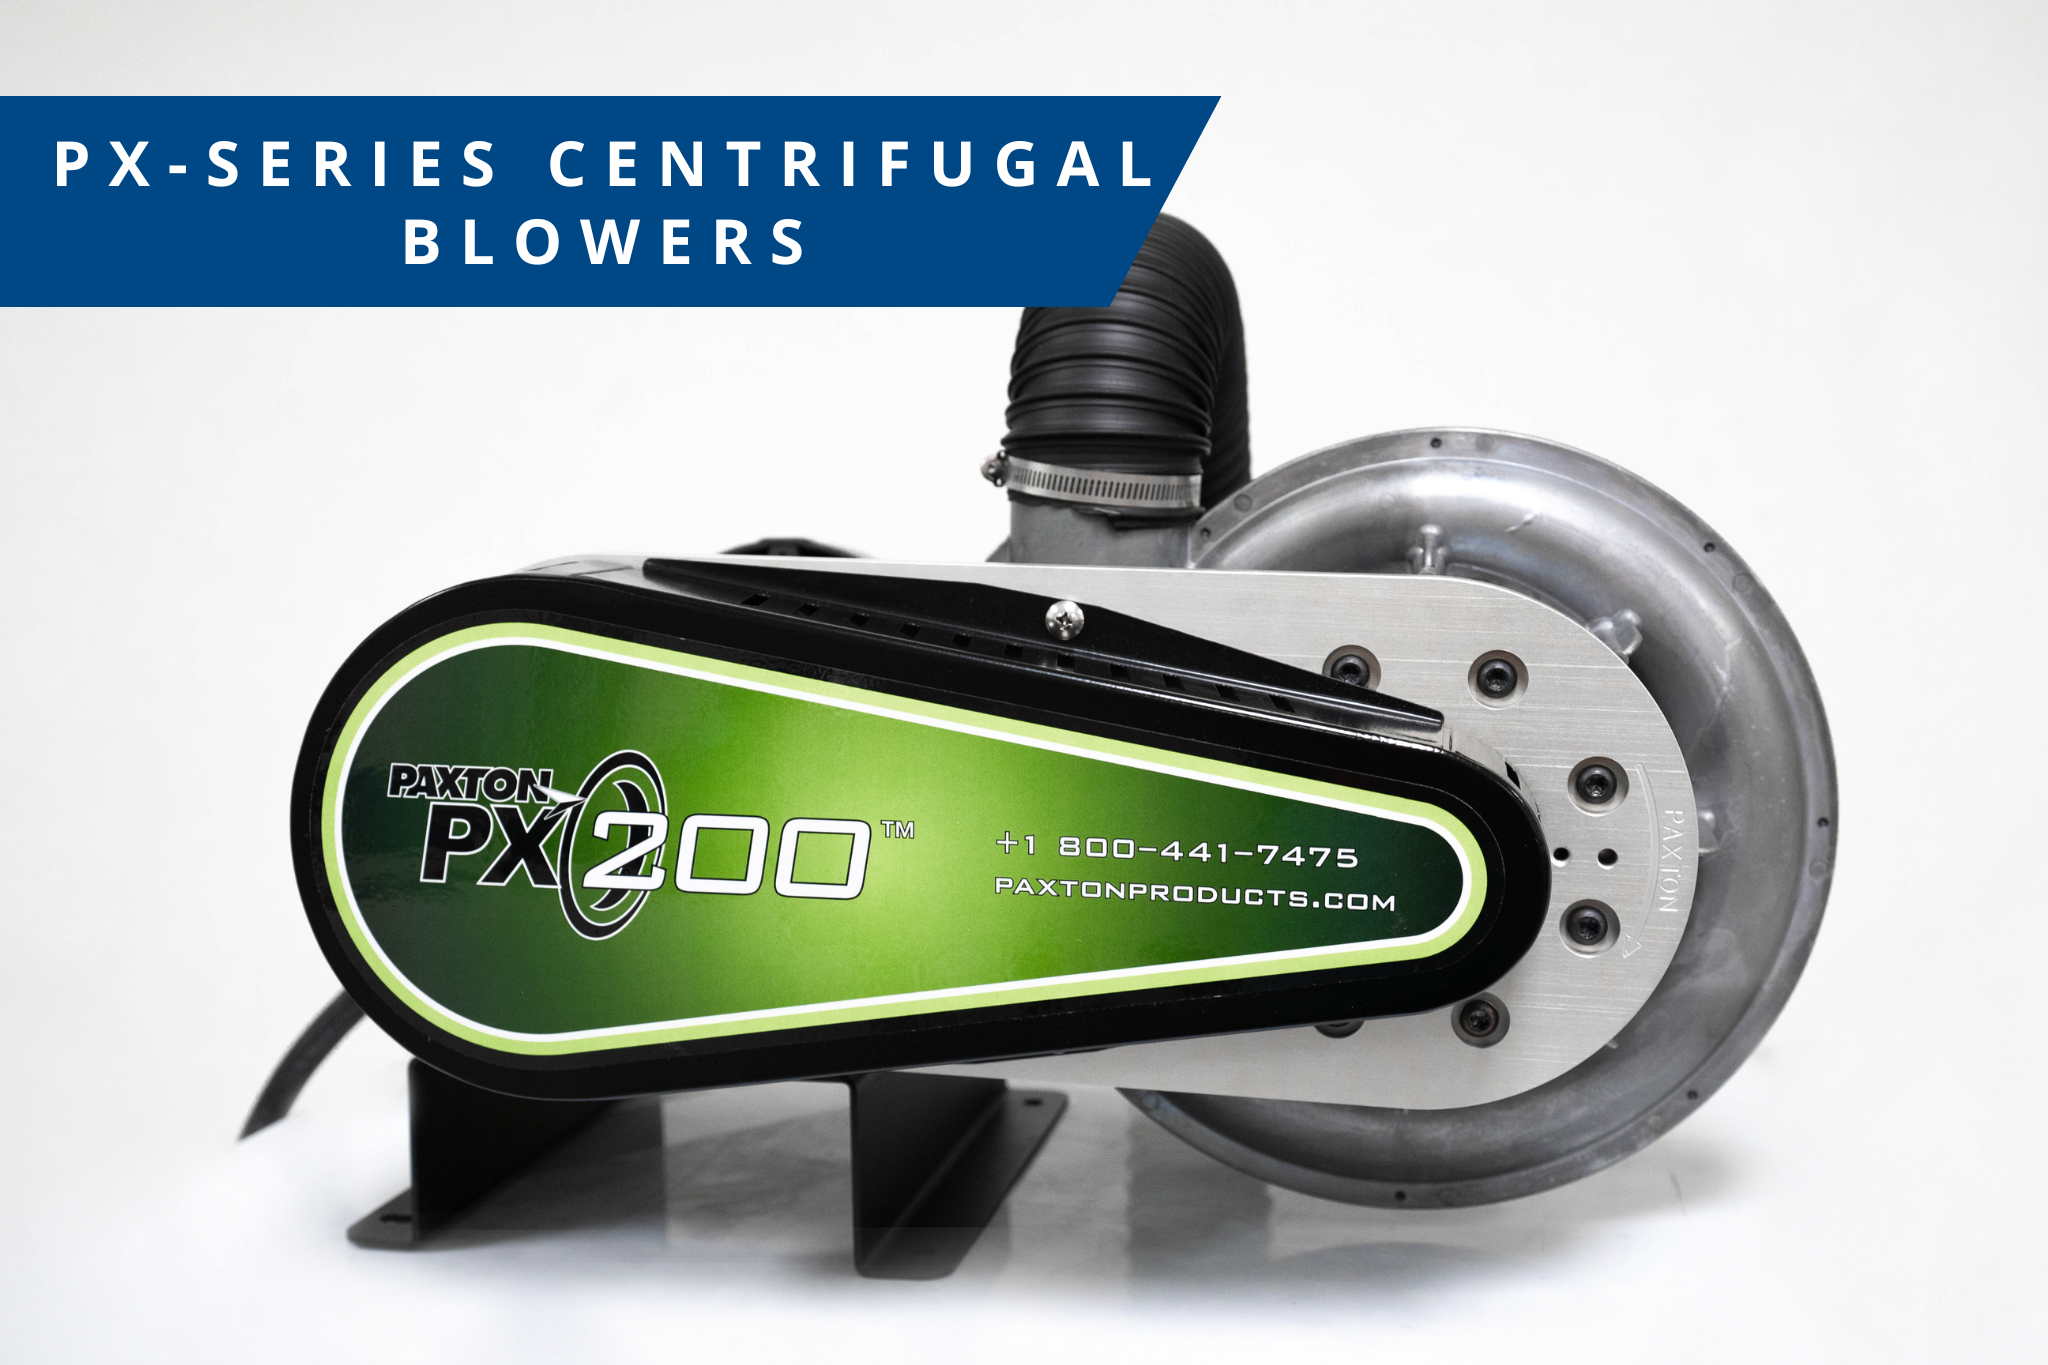 High Efficiency PX-Series Centrifugal Blowers